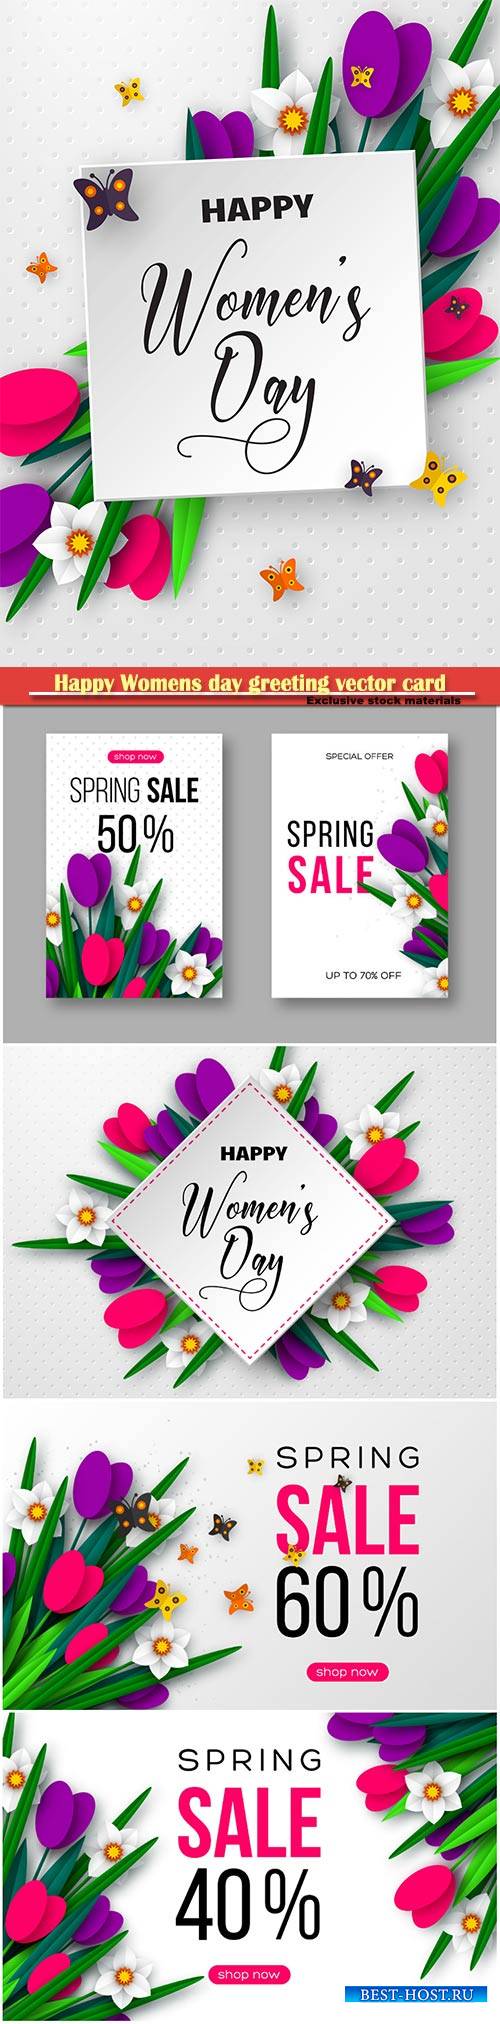 Happy Womens day floral greeting vector card design # 3